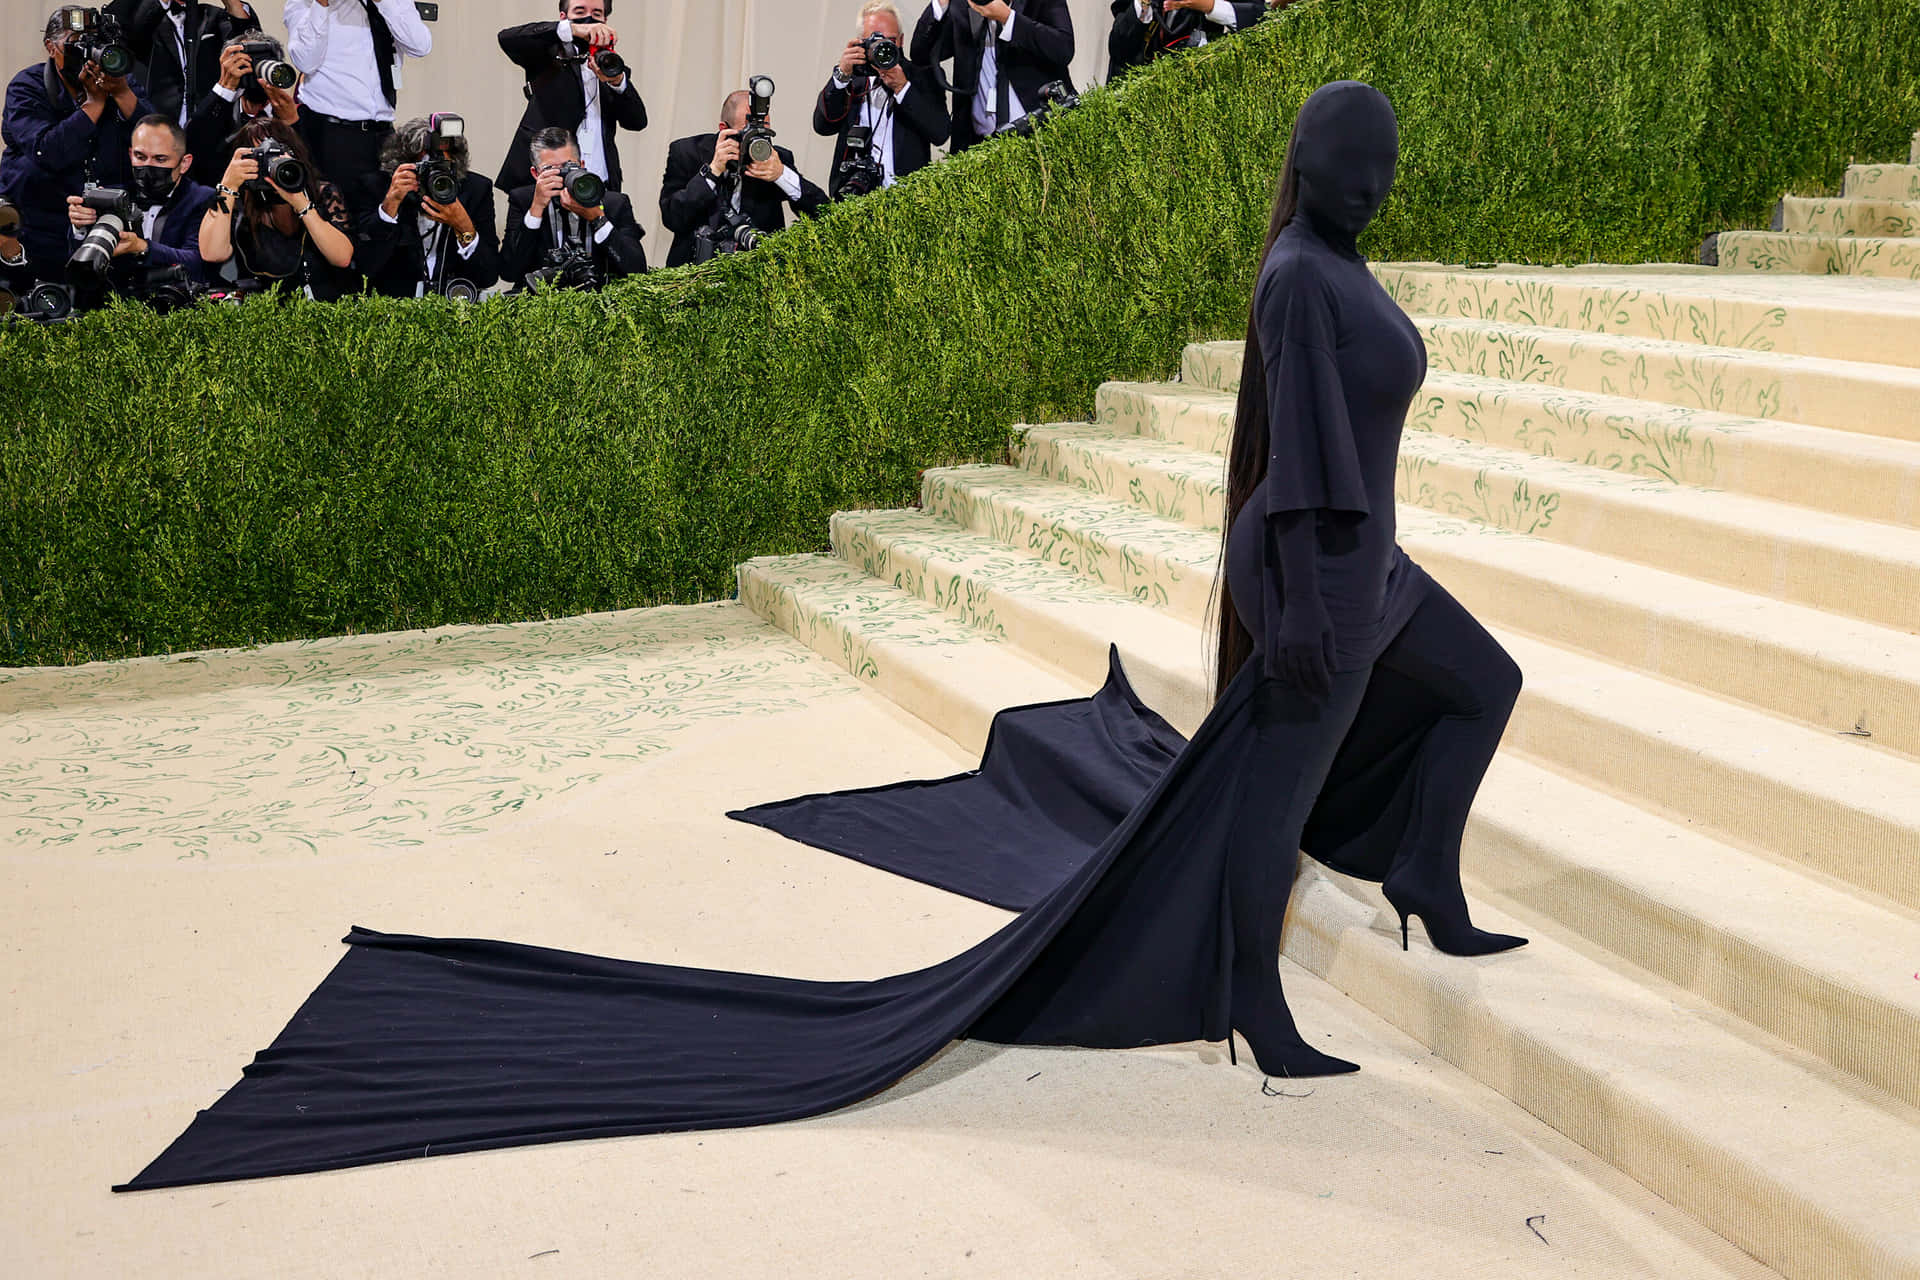 Dress to impress at the annual Met Gala